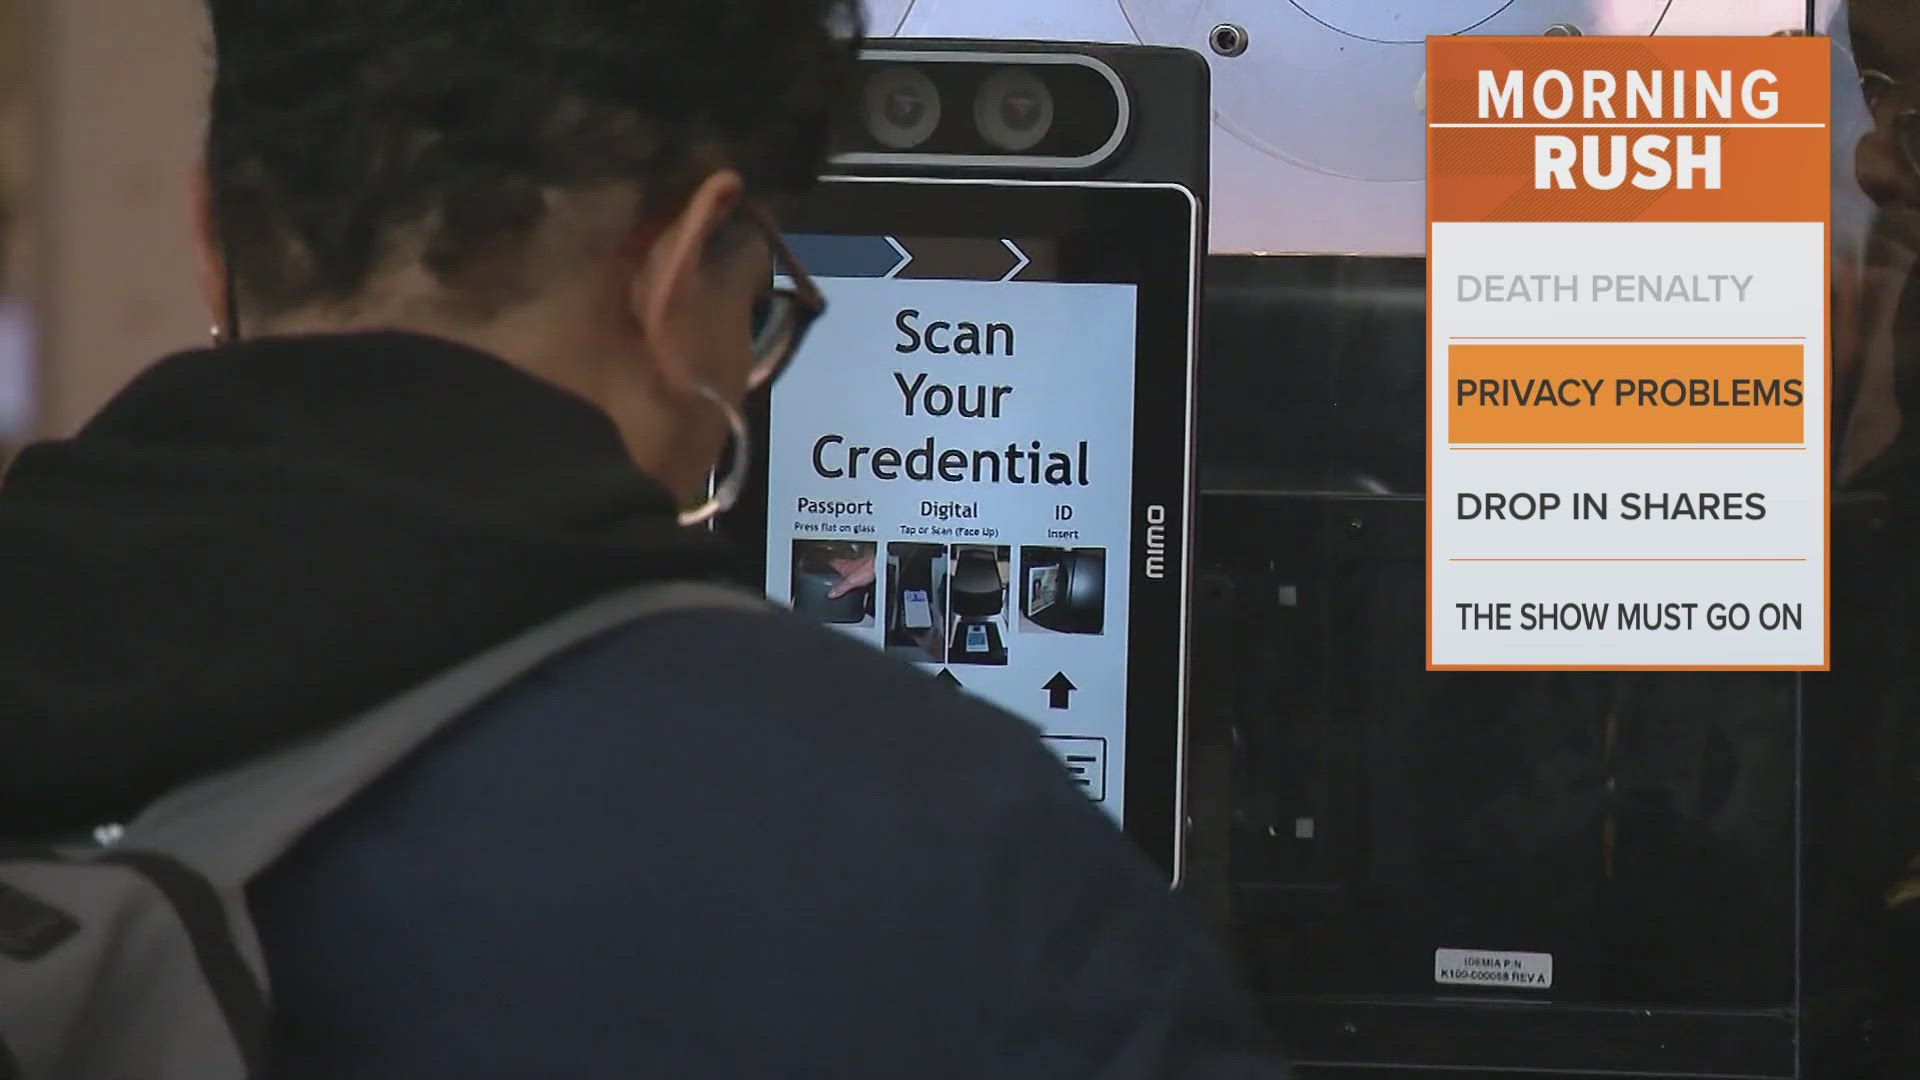 The technology is being used at 84 airports, including DFW Airport.